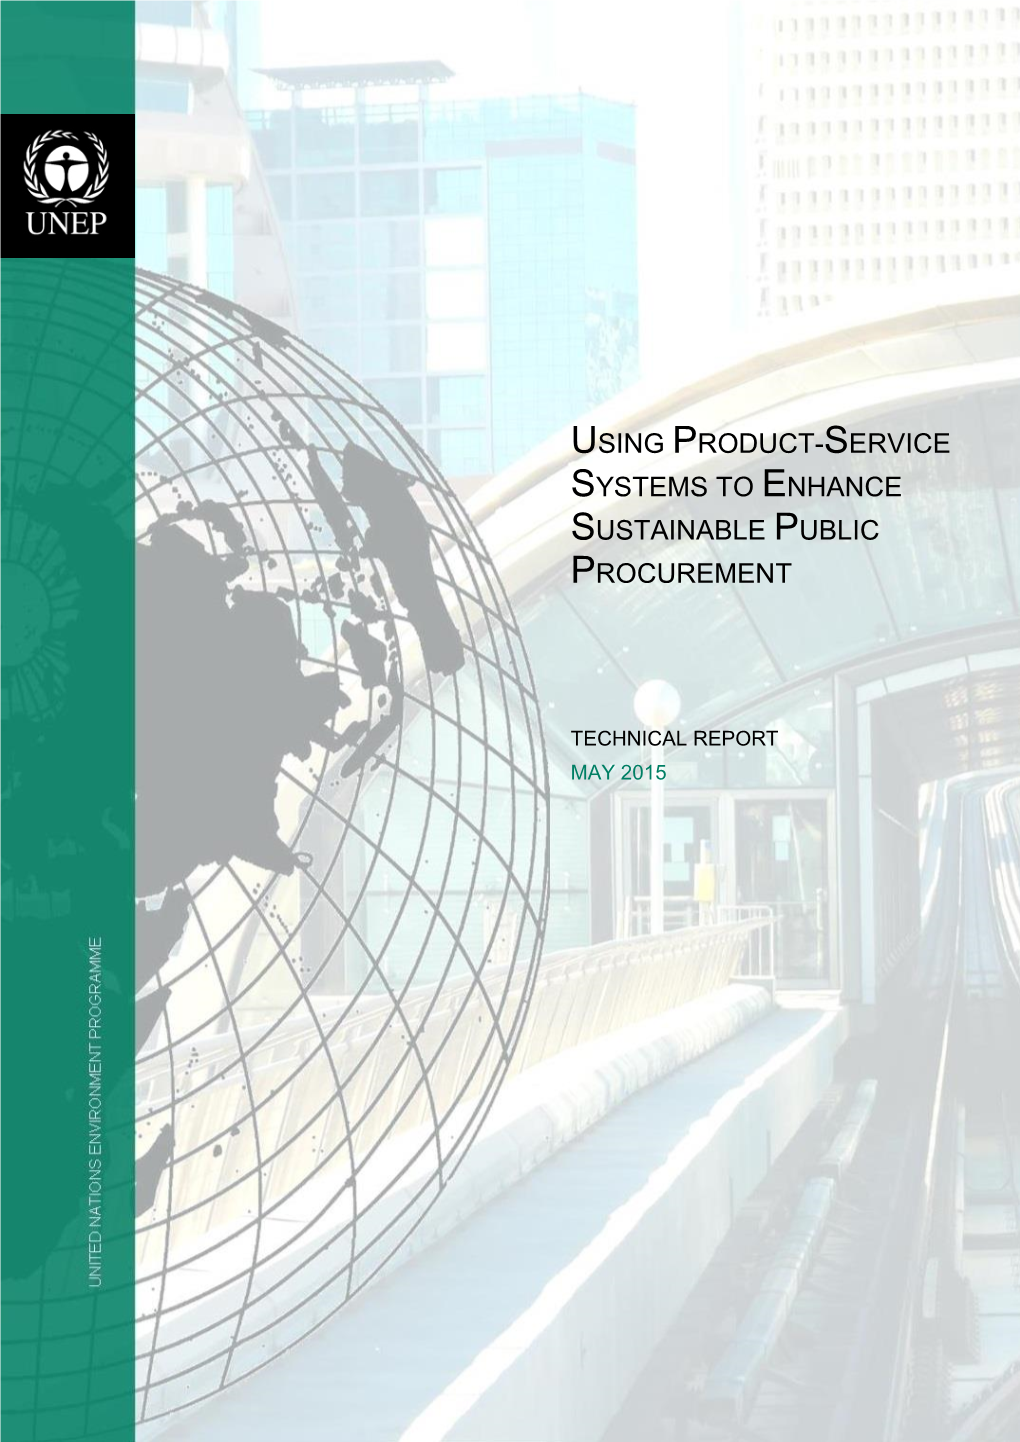 Using Product-Service Systems to Enhance Sustainable Public Procurement